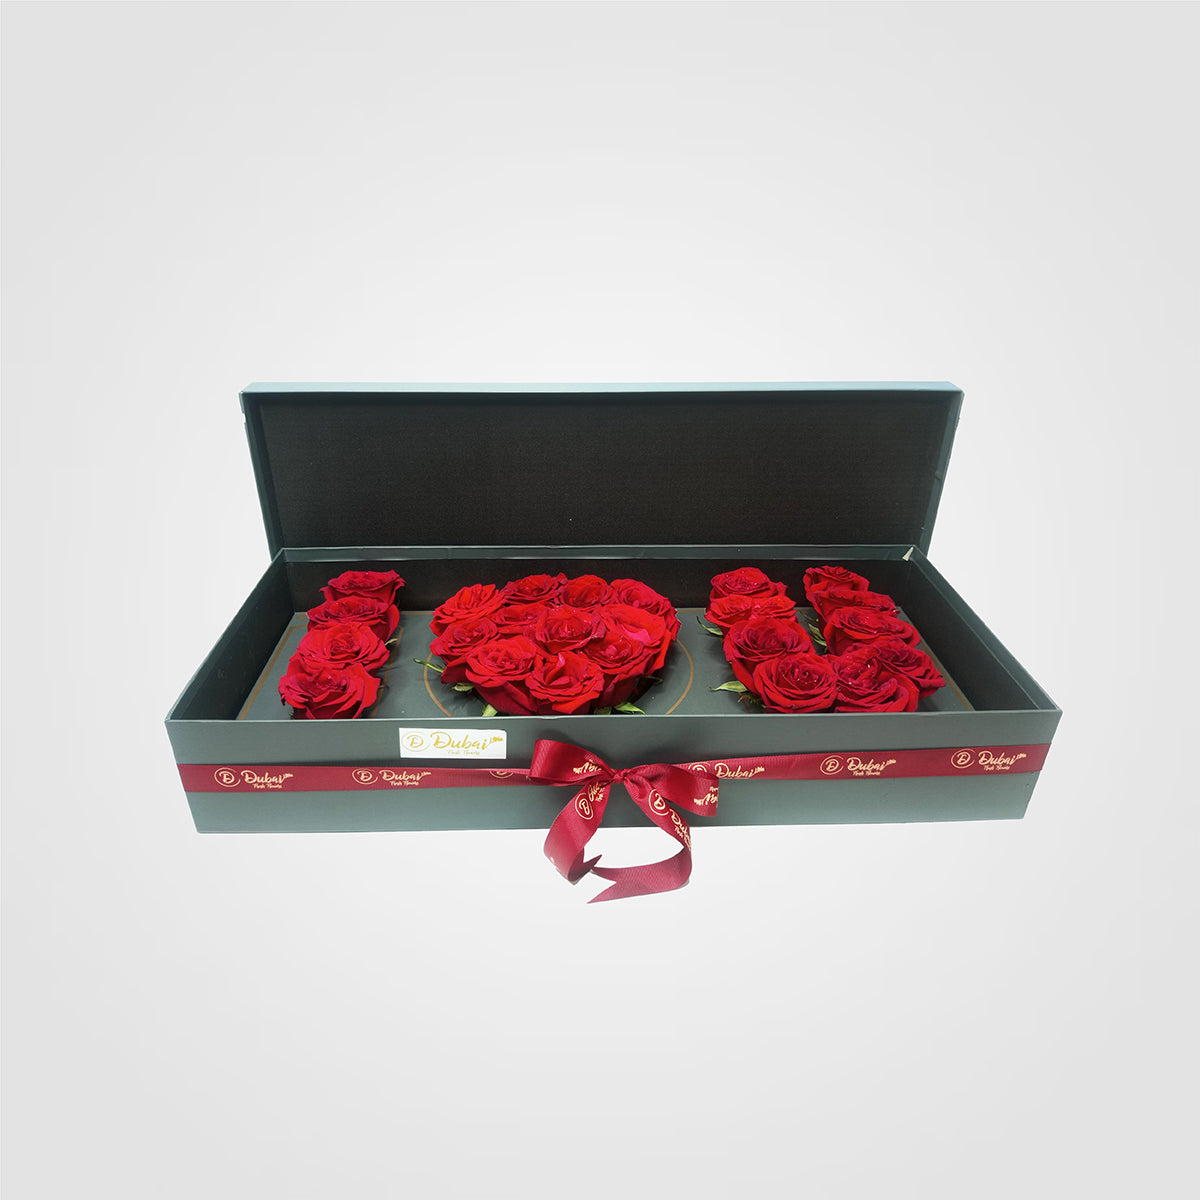 I Love You Red Rose flower Box